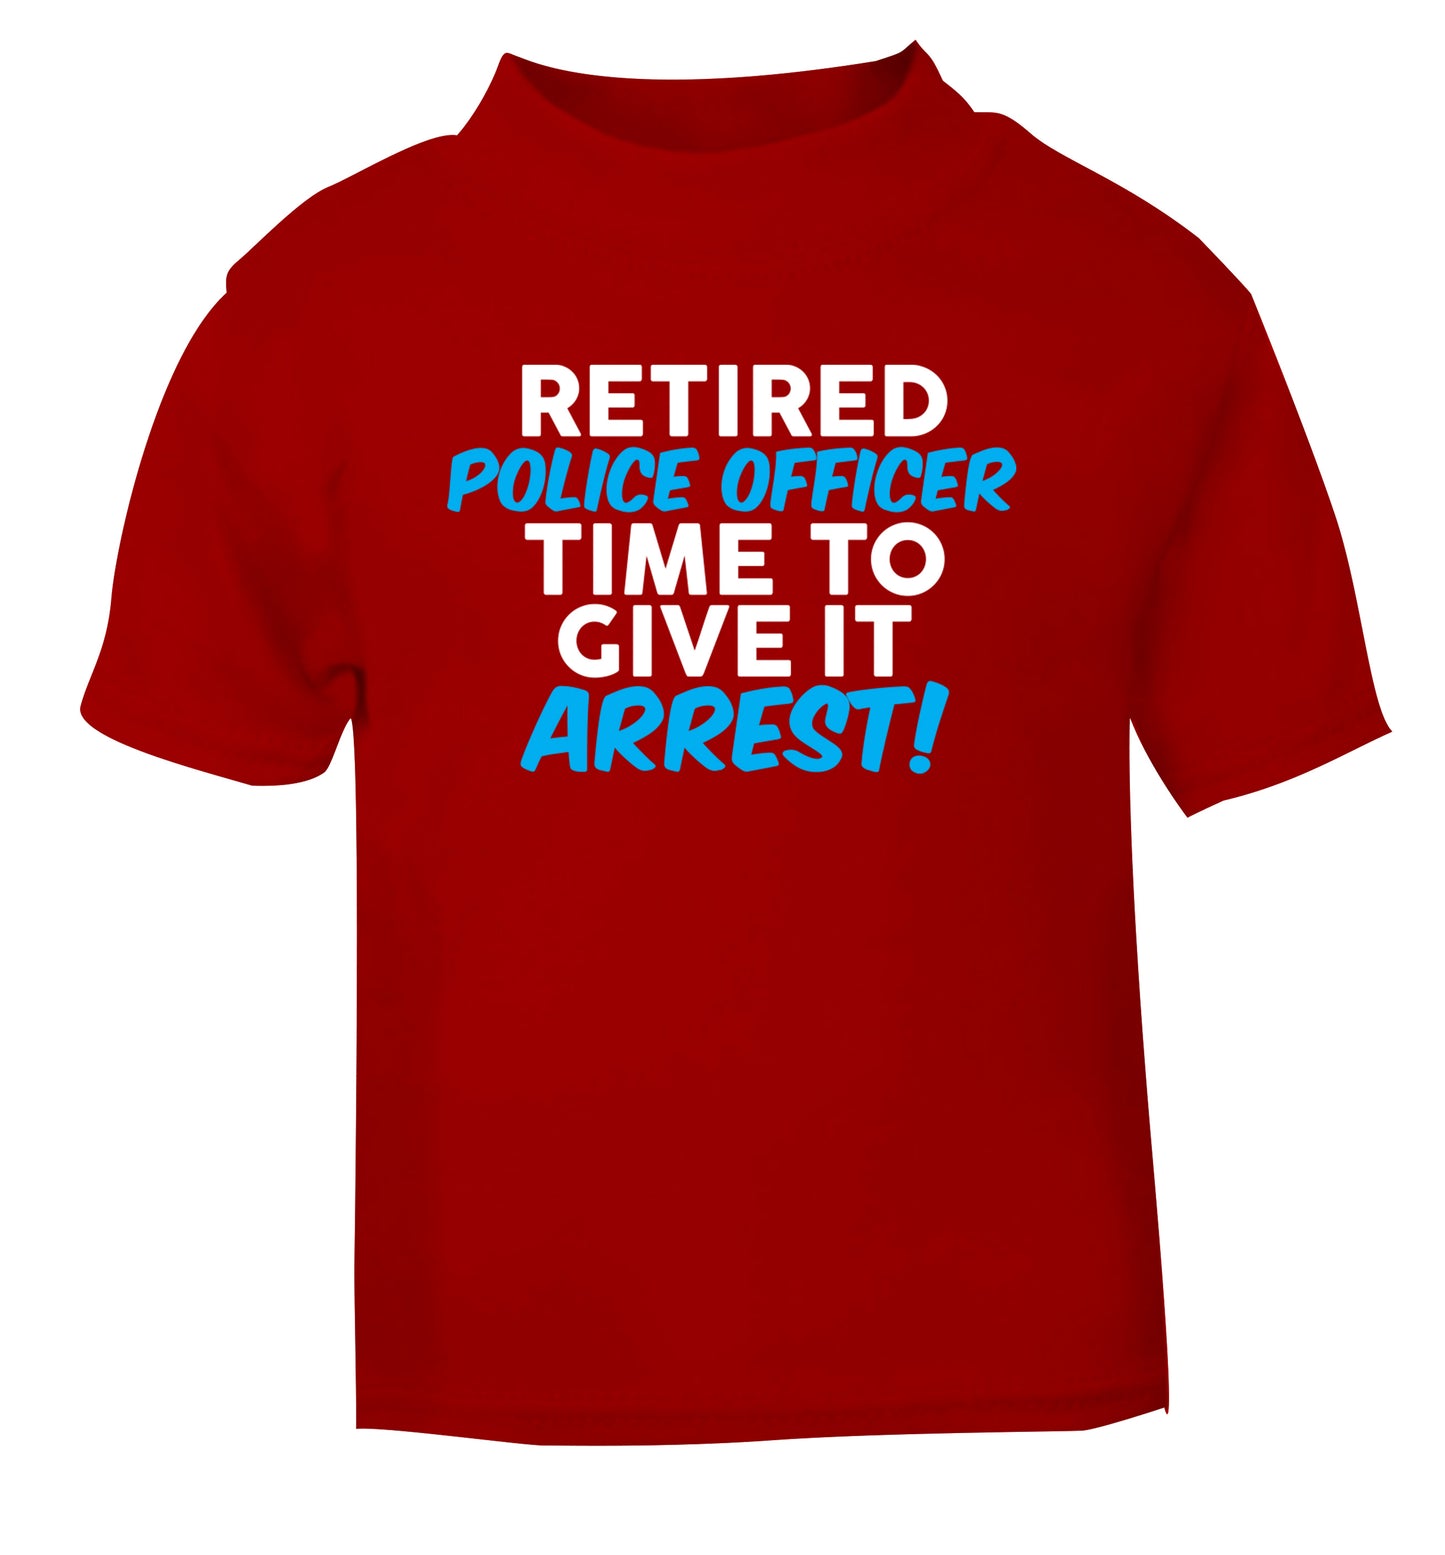 Retired police officer time to give it arrest red Baby Toddler Tshirt 2 Years